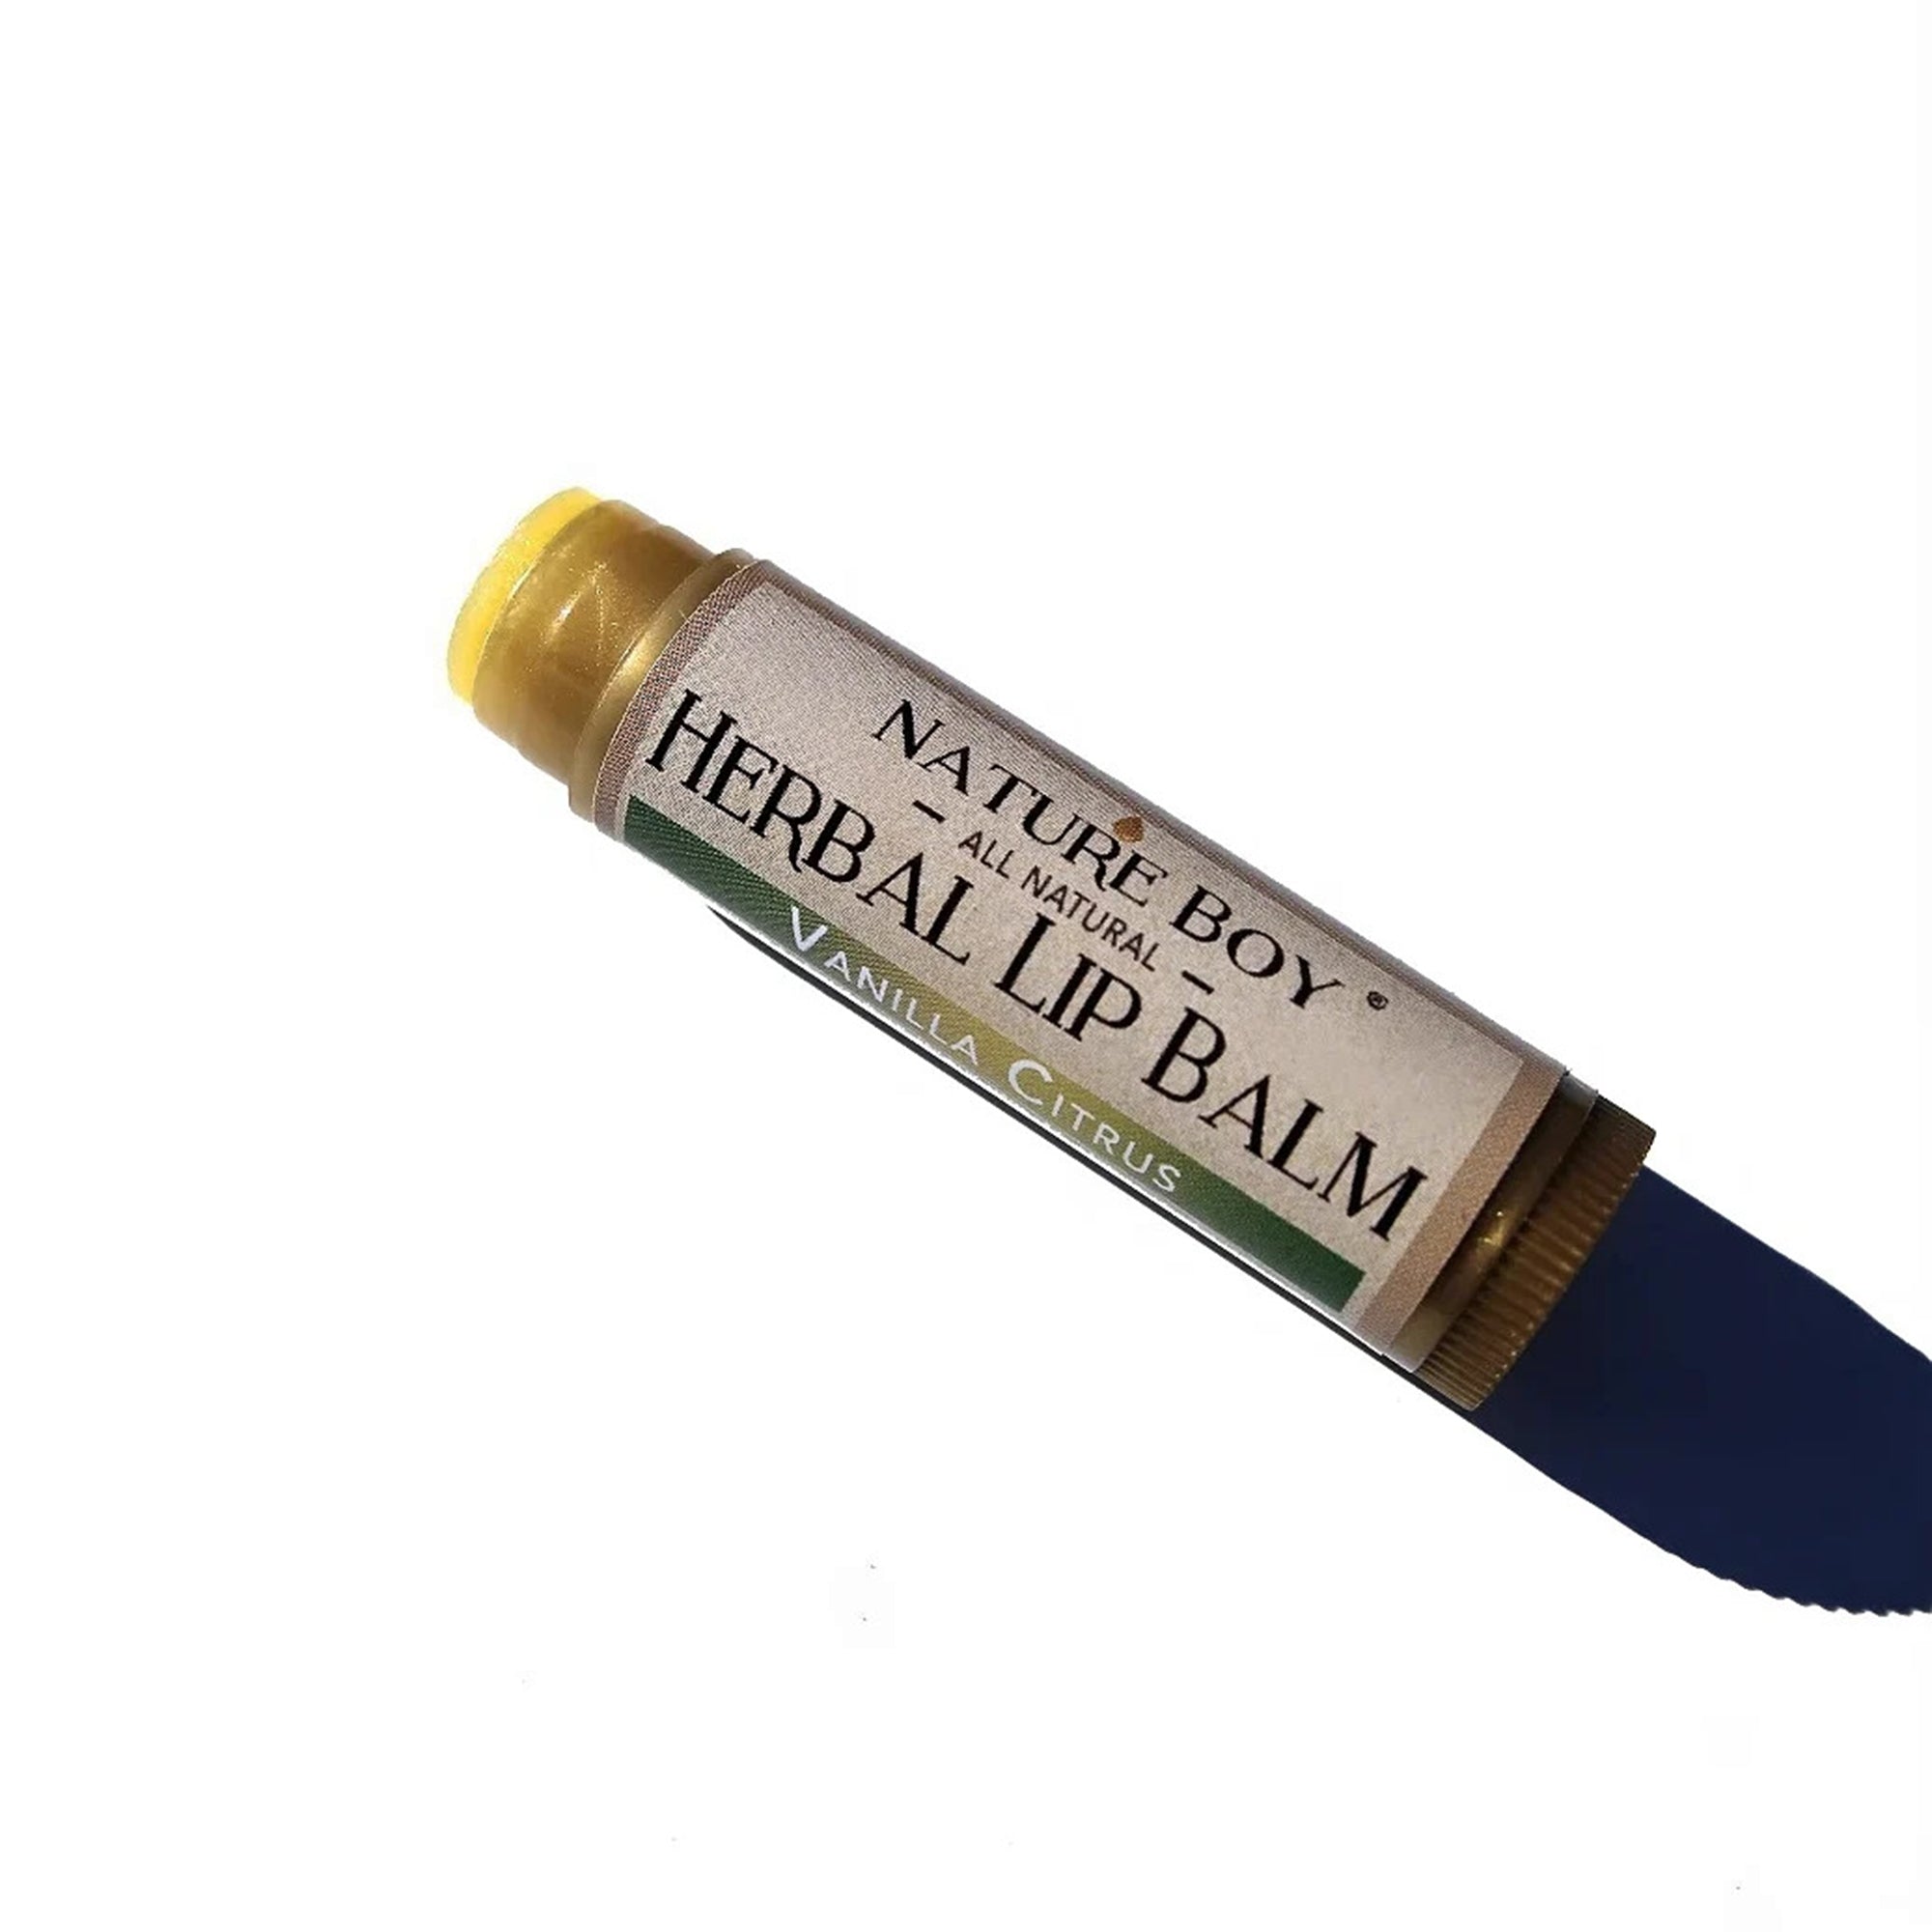 Nature Boy Grooming Products herbal lip balm